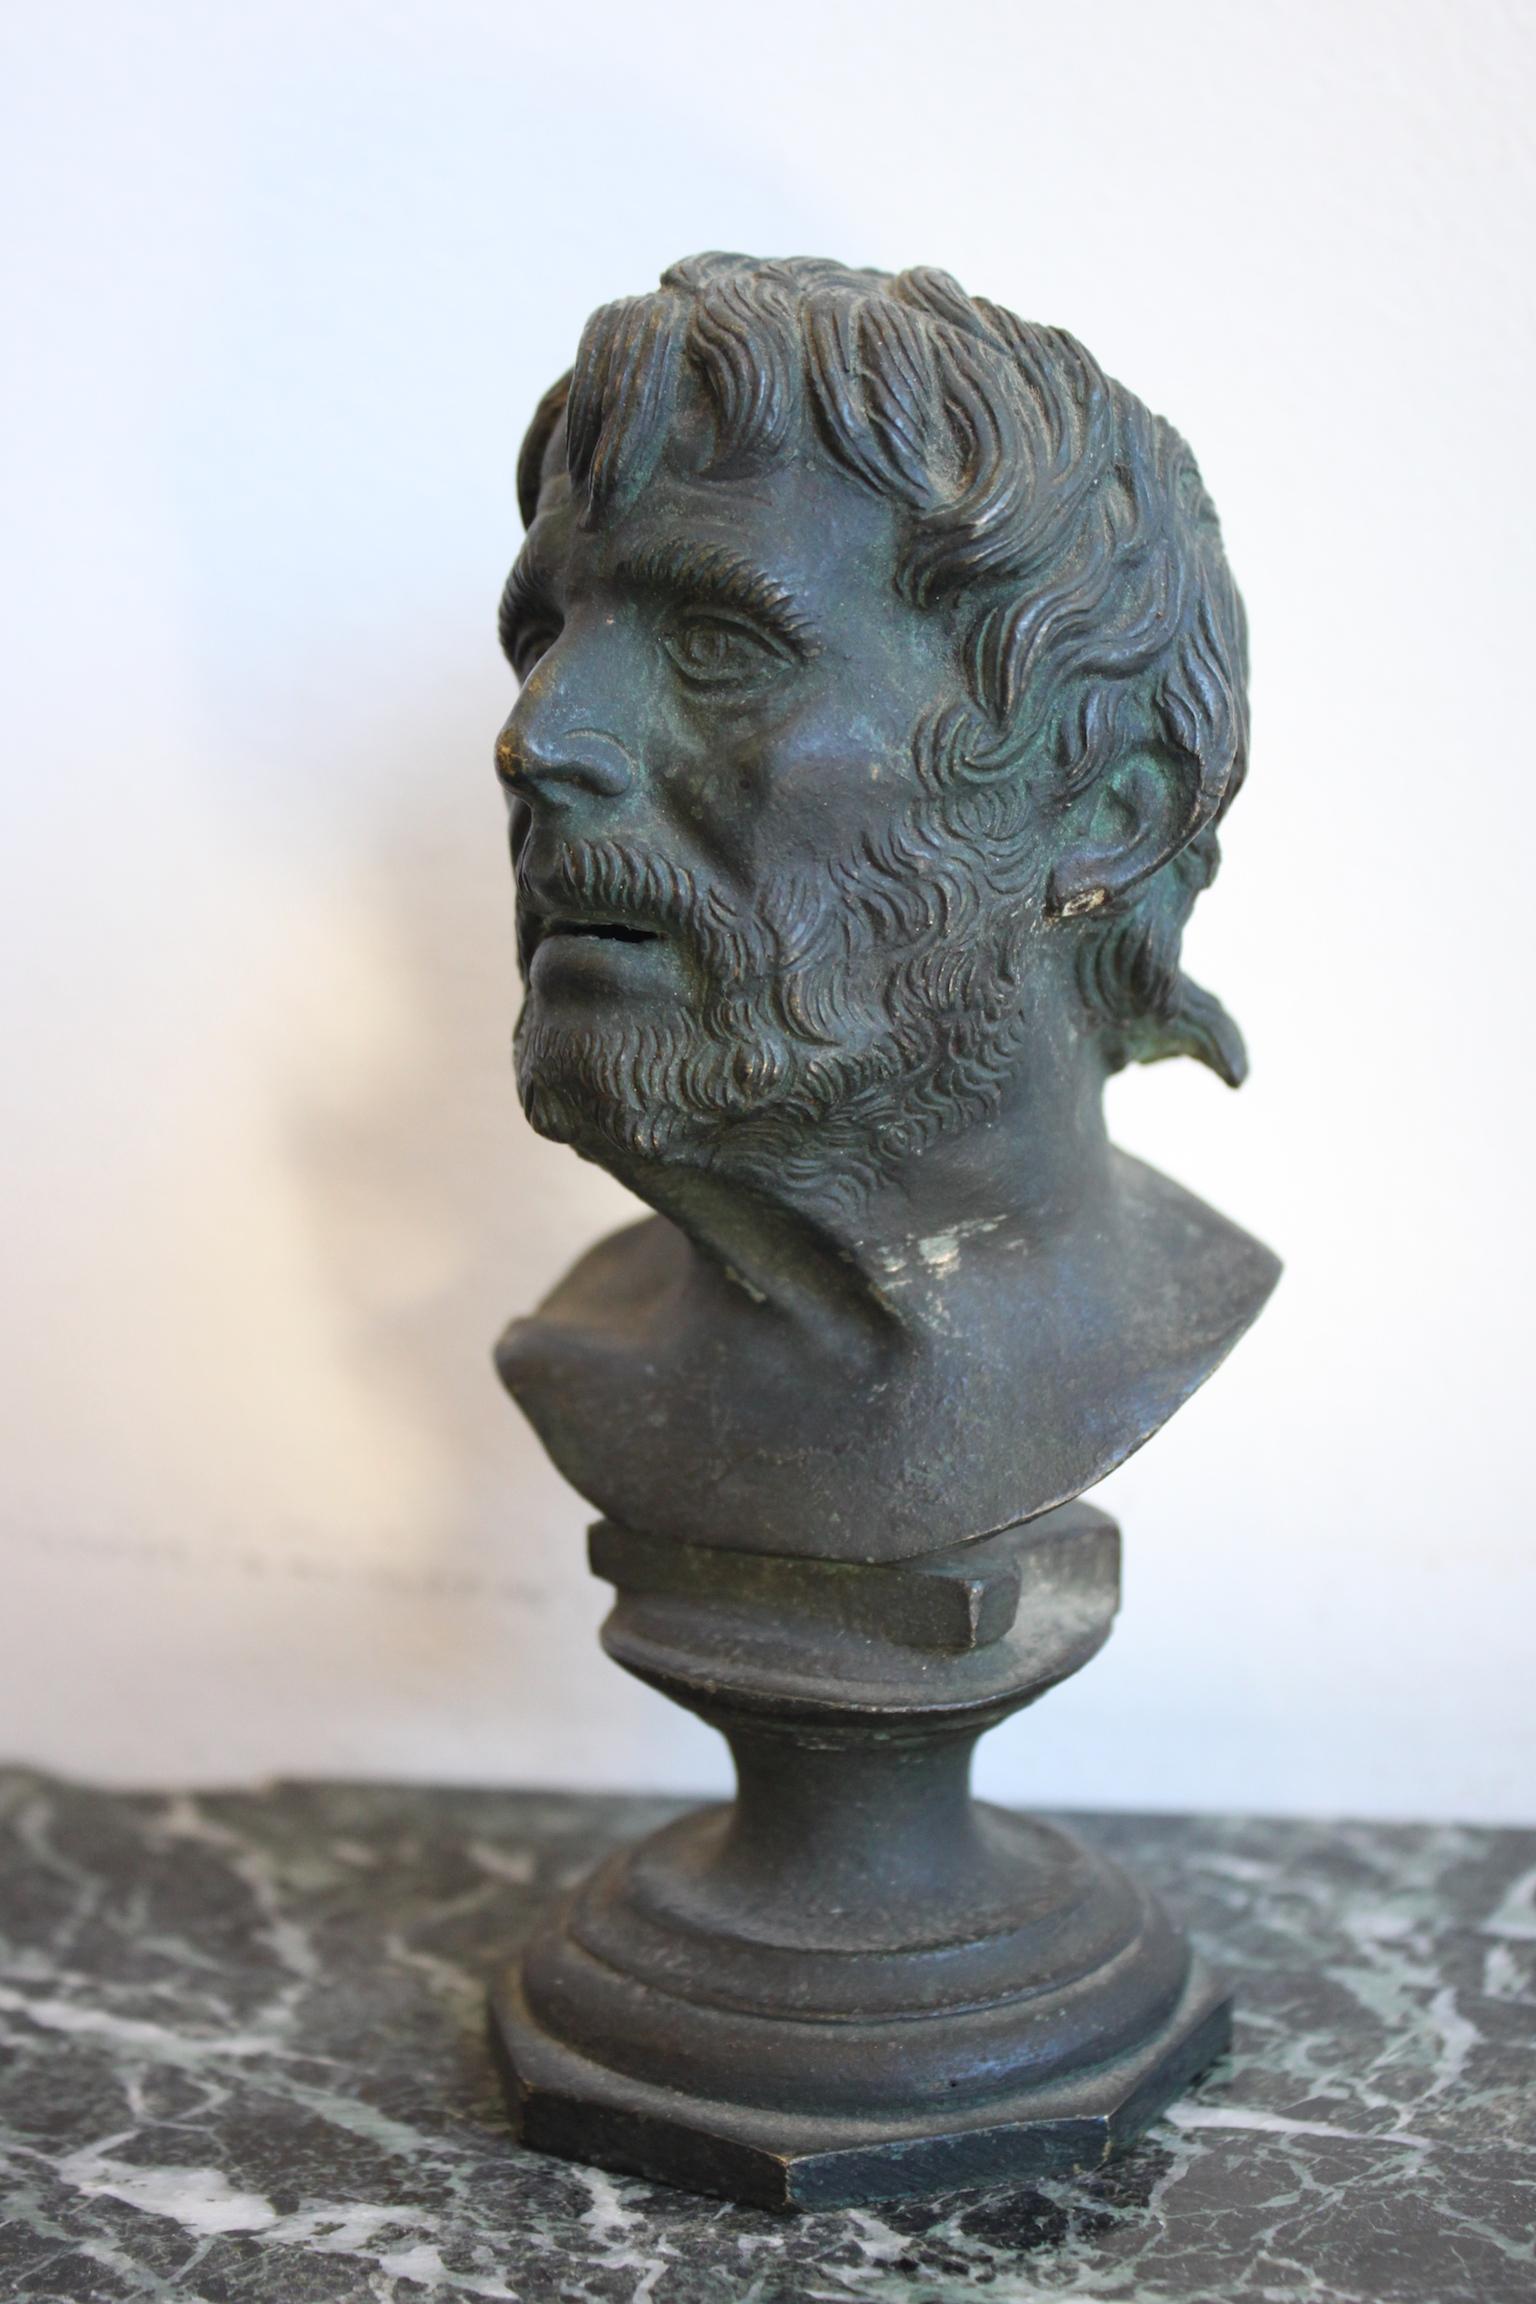 19th century bust of Seneca, very old bronze. Very fine. Open mouth.
Dimensions: Height 14cm, diameter 6cm.